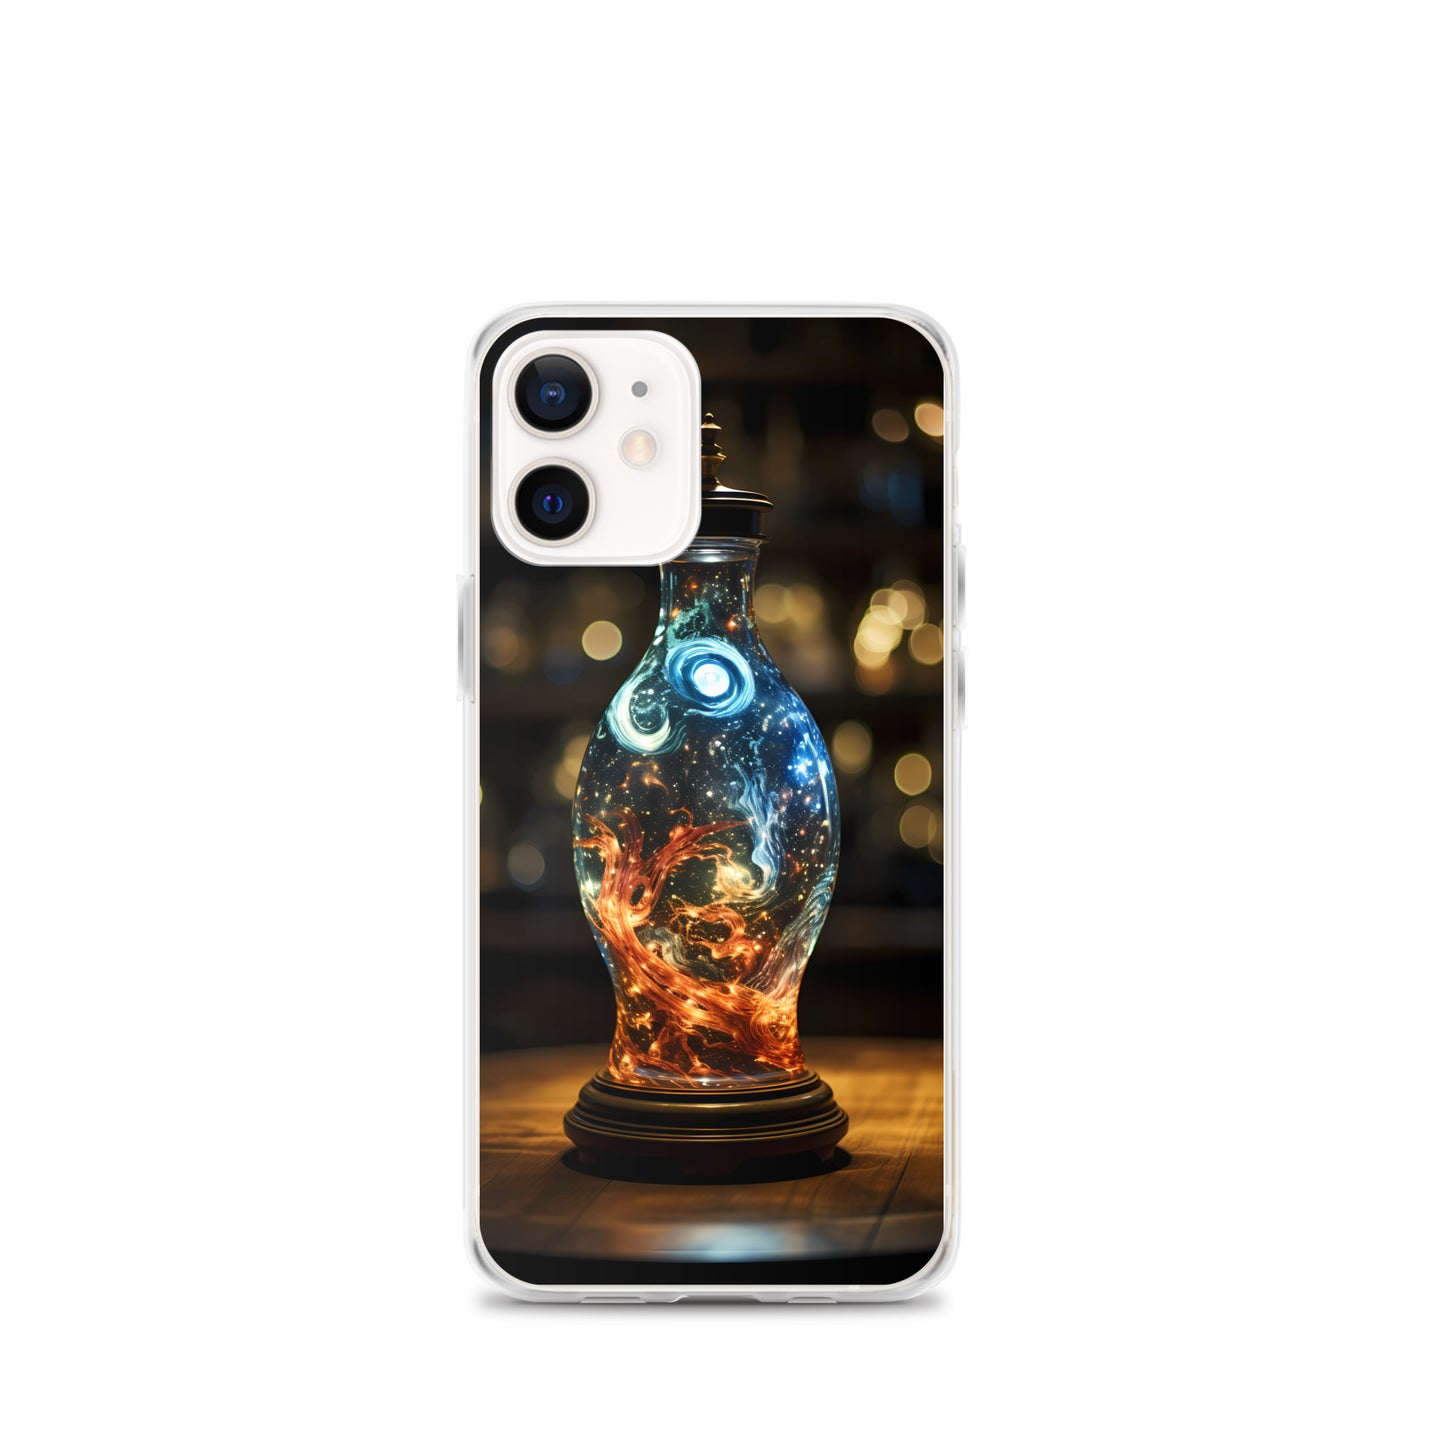 iPhone Case - Universe in a Bottle #4